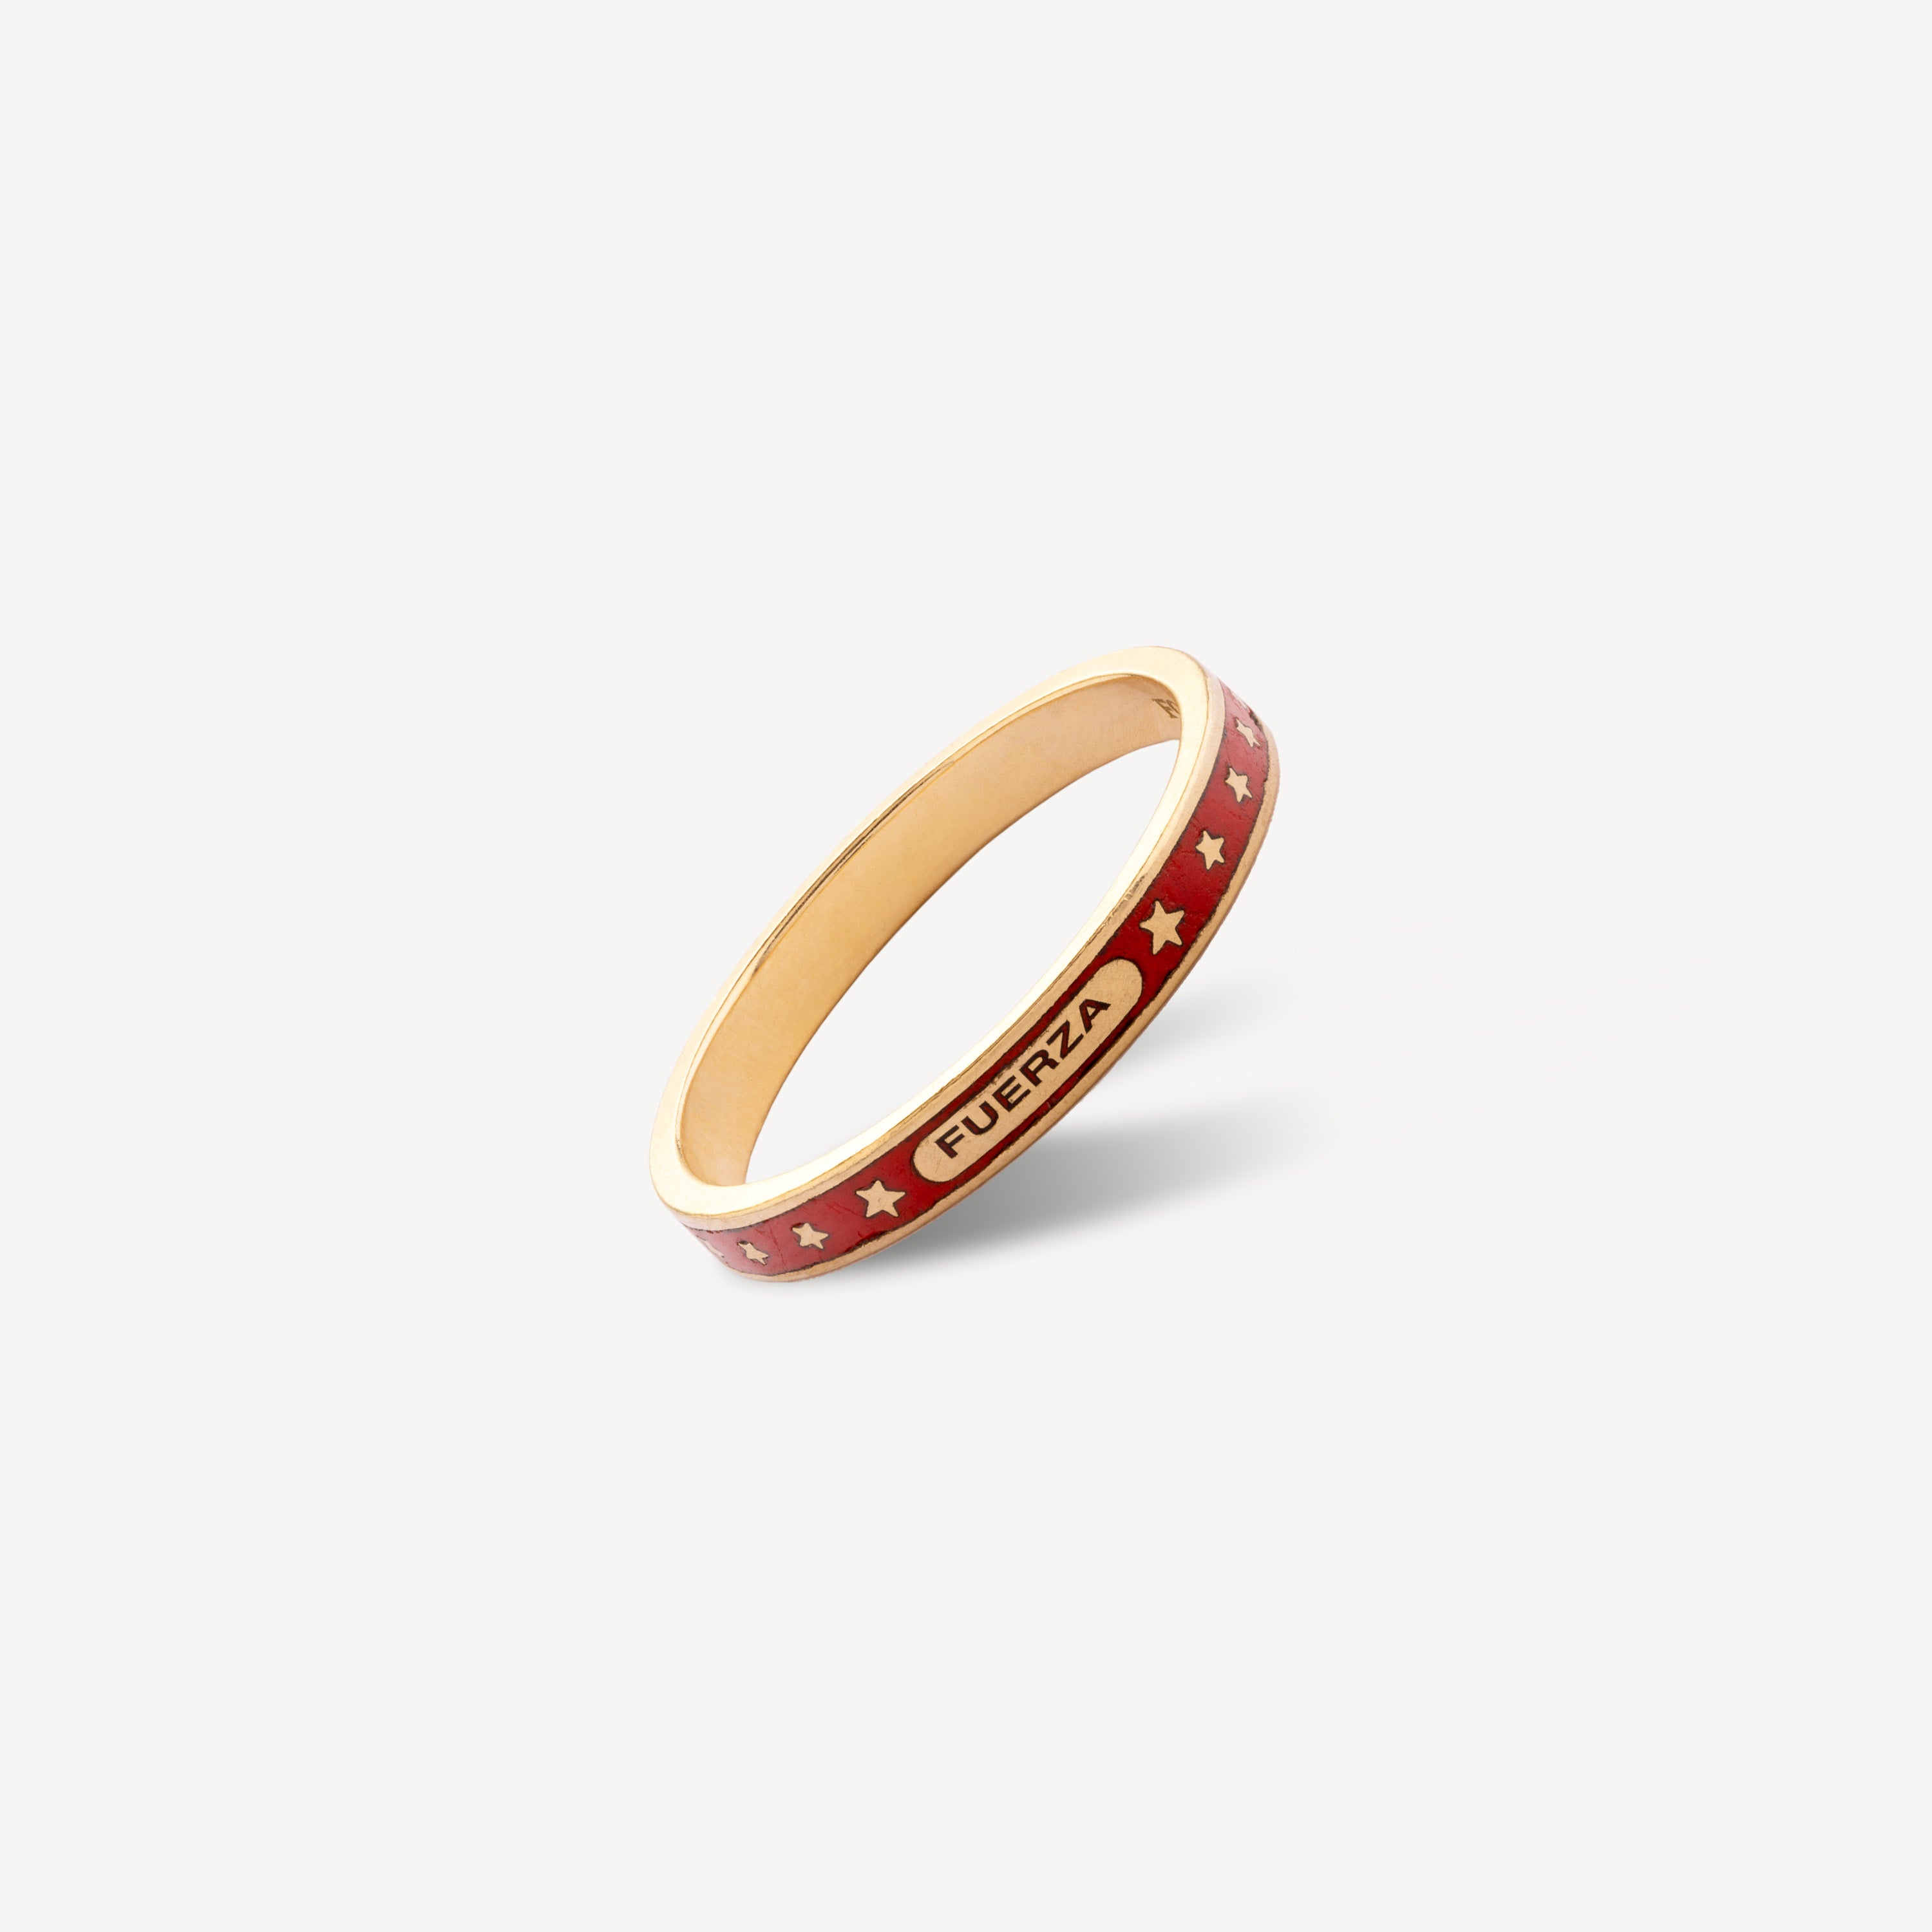 Fuerza Thin Champleve Enamel Ring